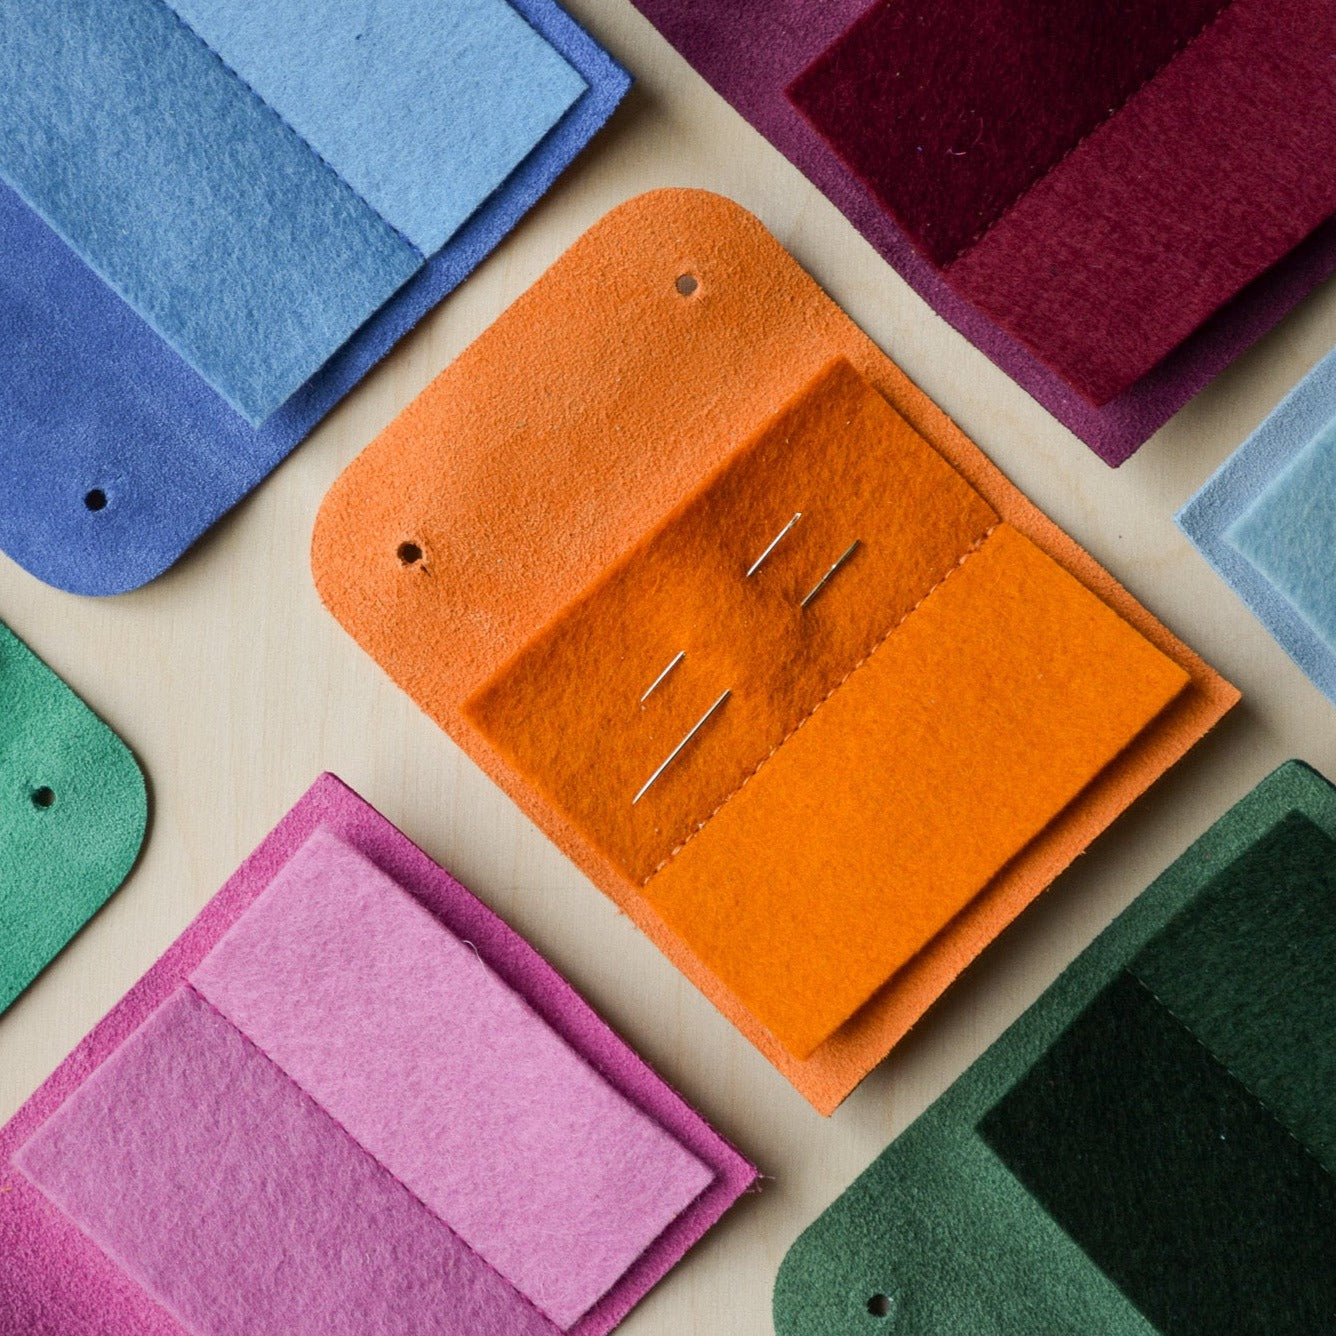 Suede sewing needle case in orange, cobalt blue, fuchsia pink and other colours.